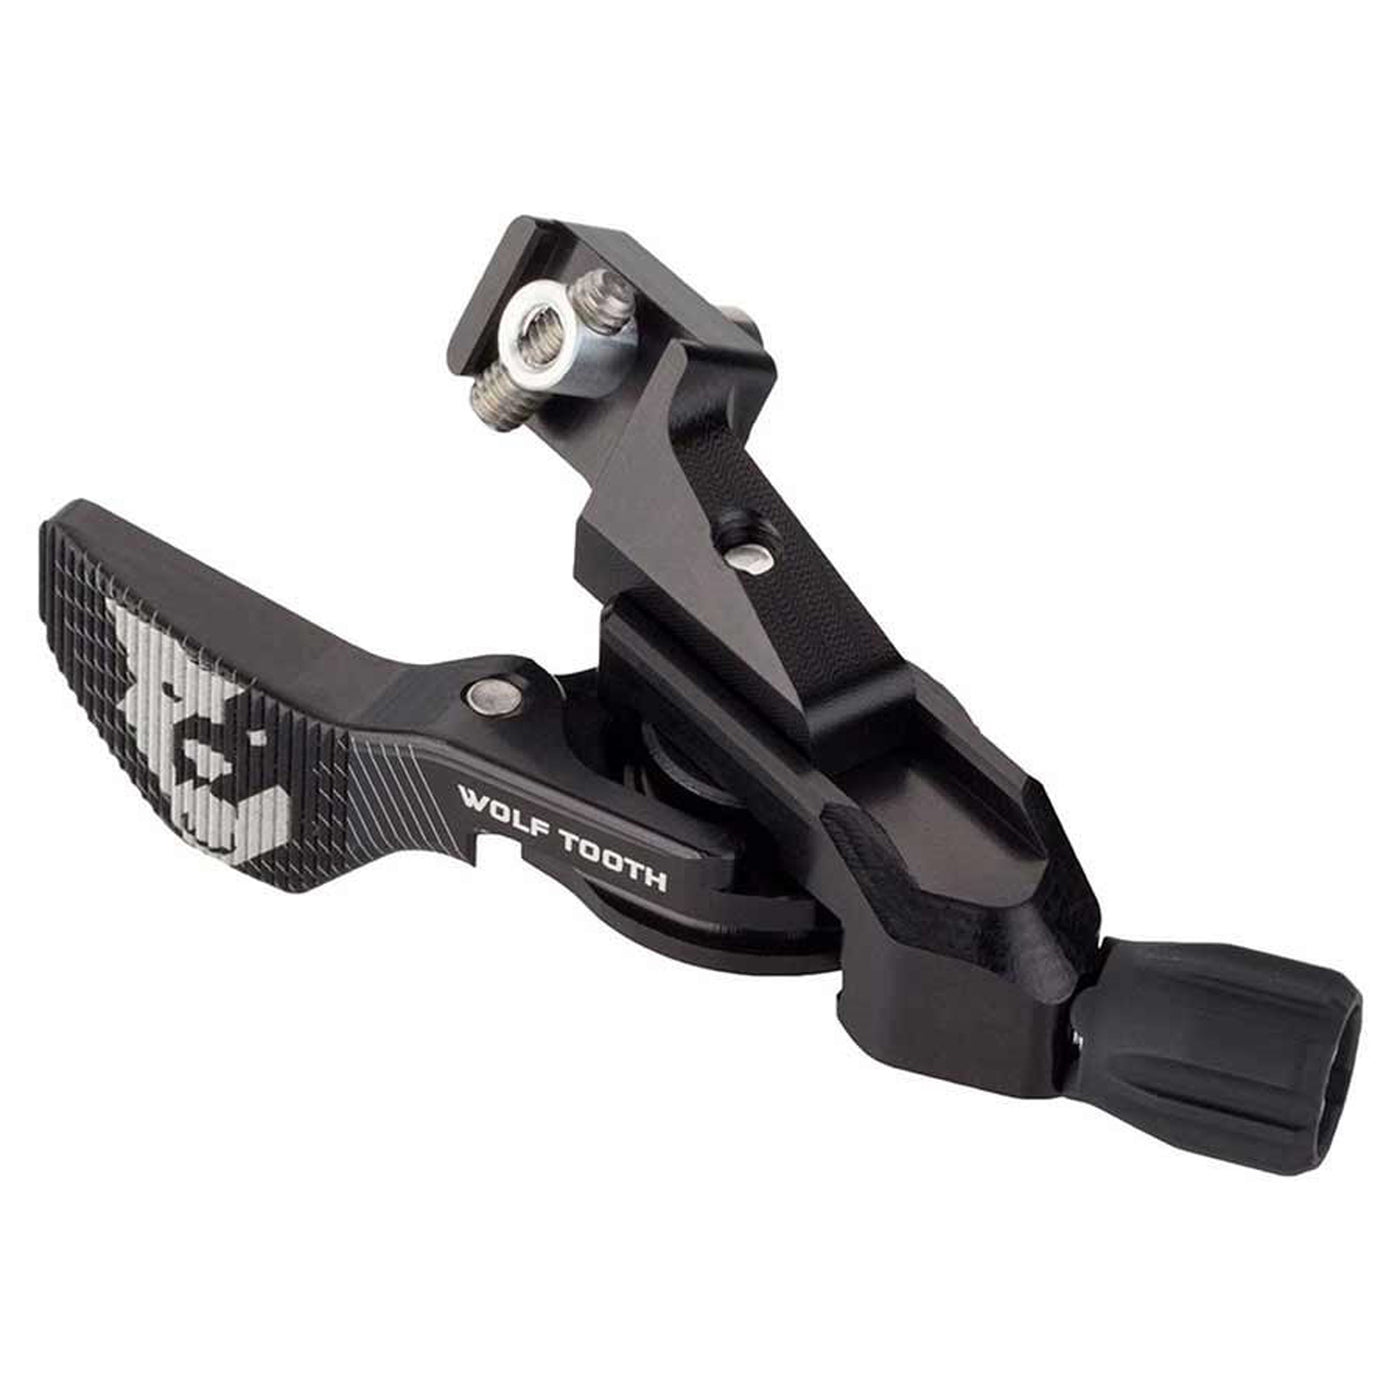 Wolf Tooth dropper seatpost remote